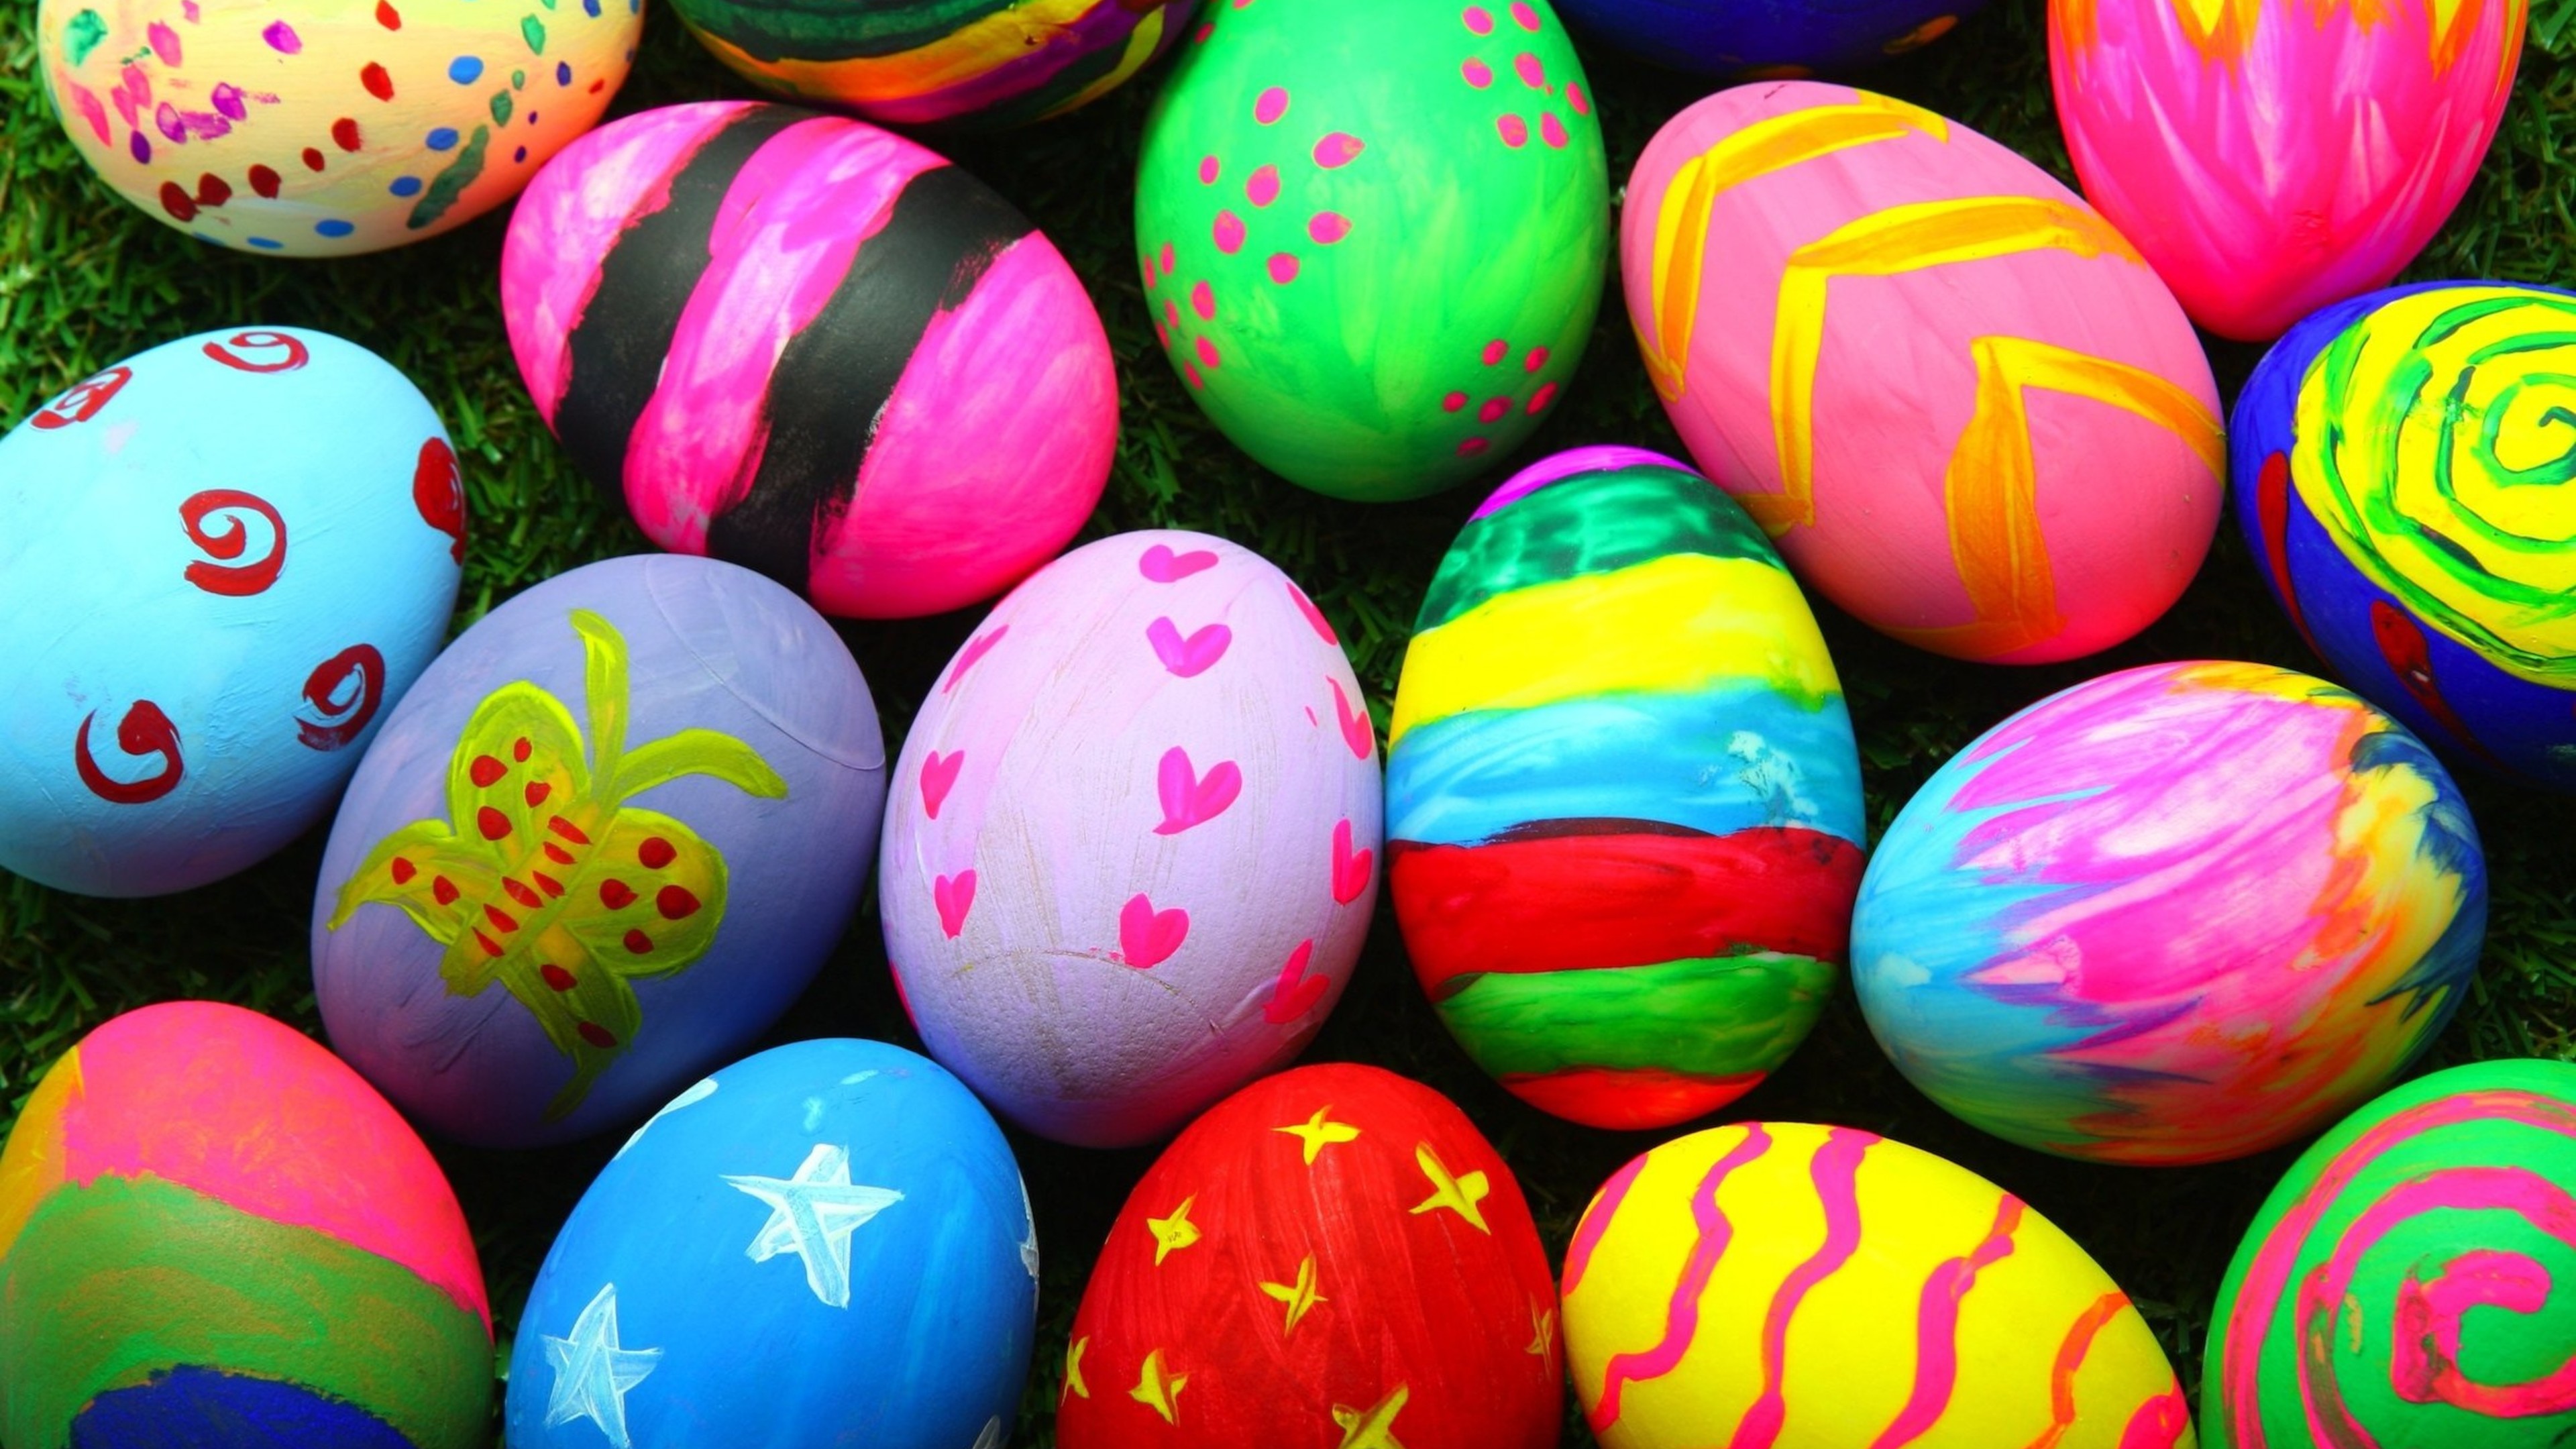 Colorful Easter Eggs, HD Celebrations, 4k Wallpapers, Images ...